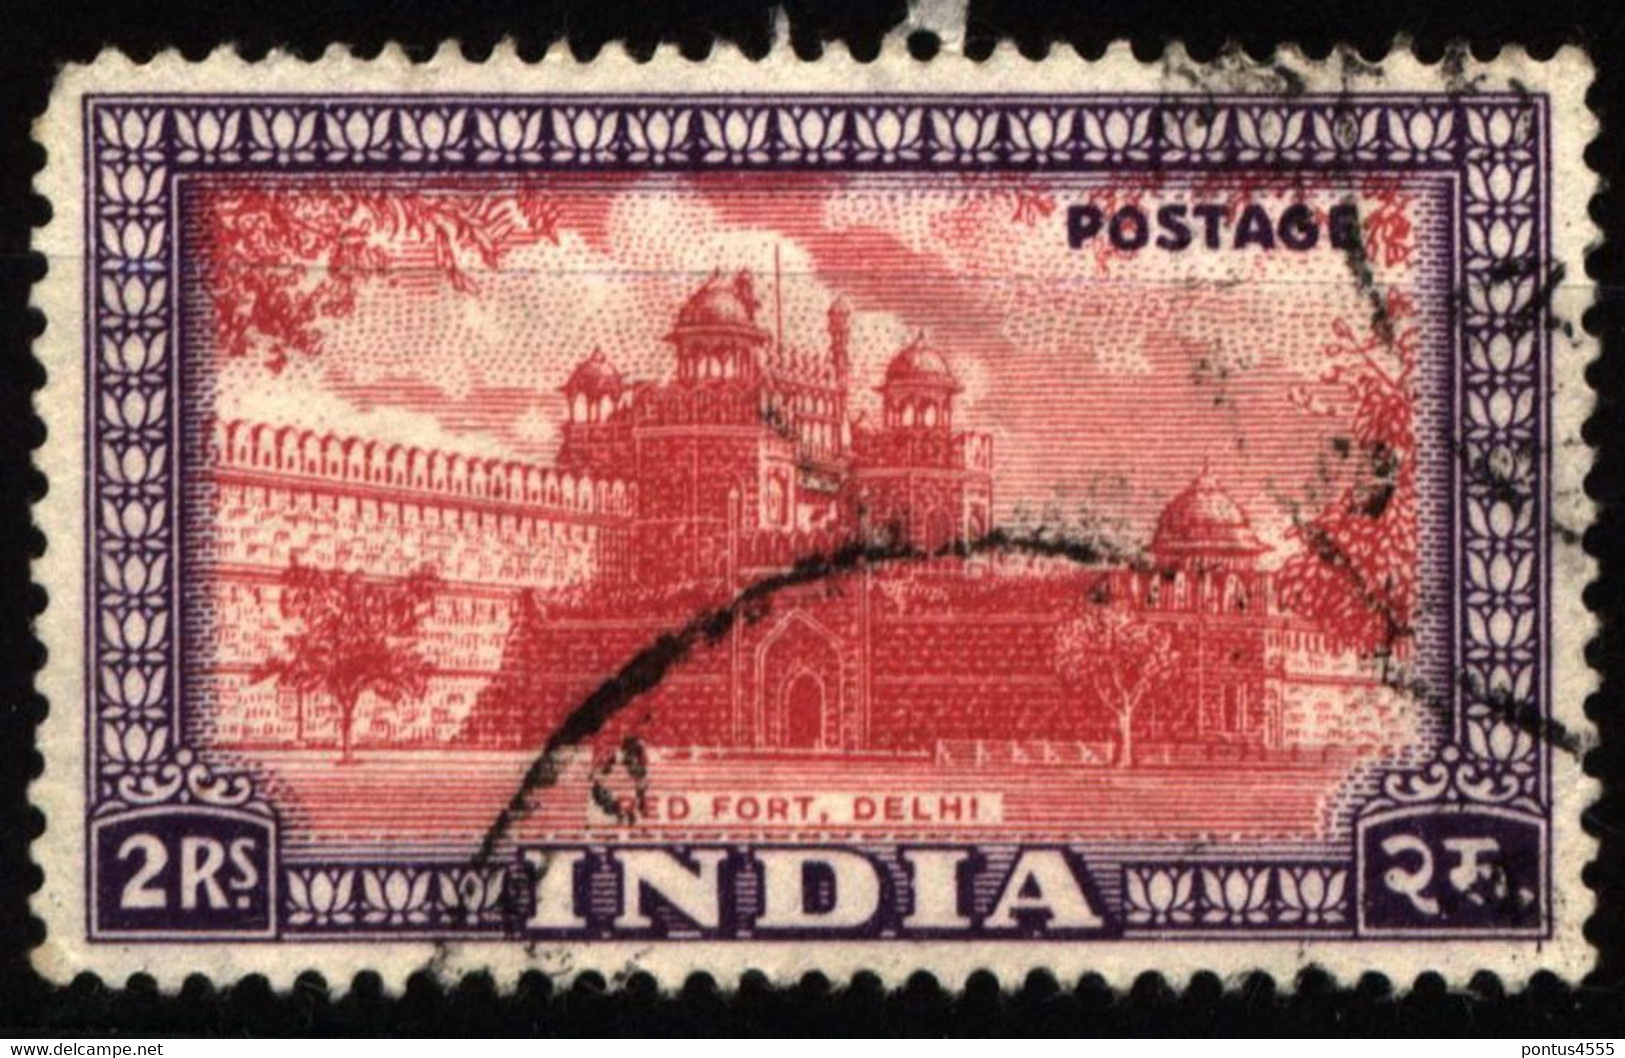 India 1949 Mi 203 Red Fort, Delhi - Used Stamps